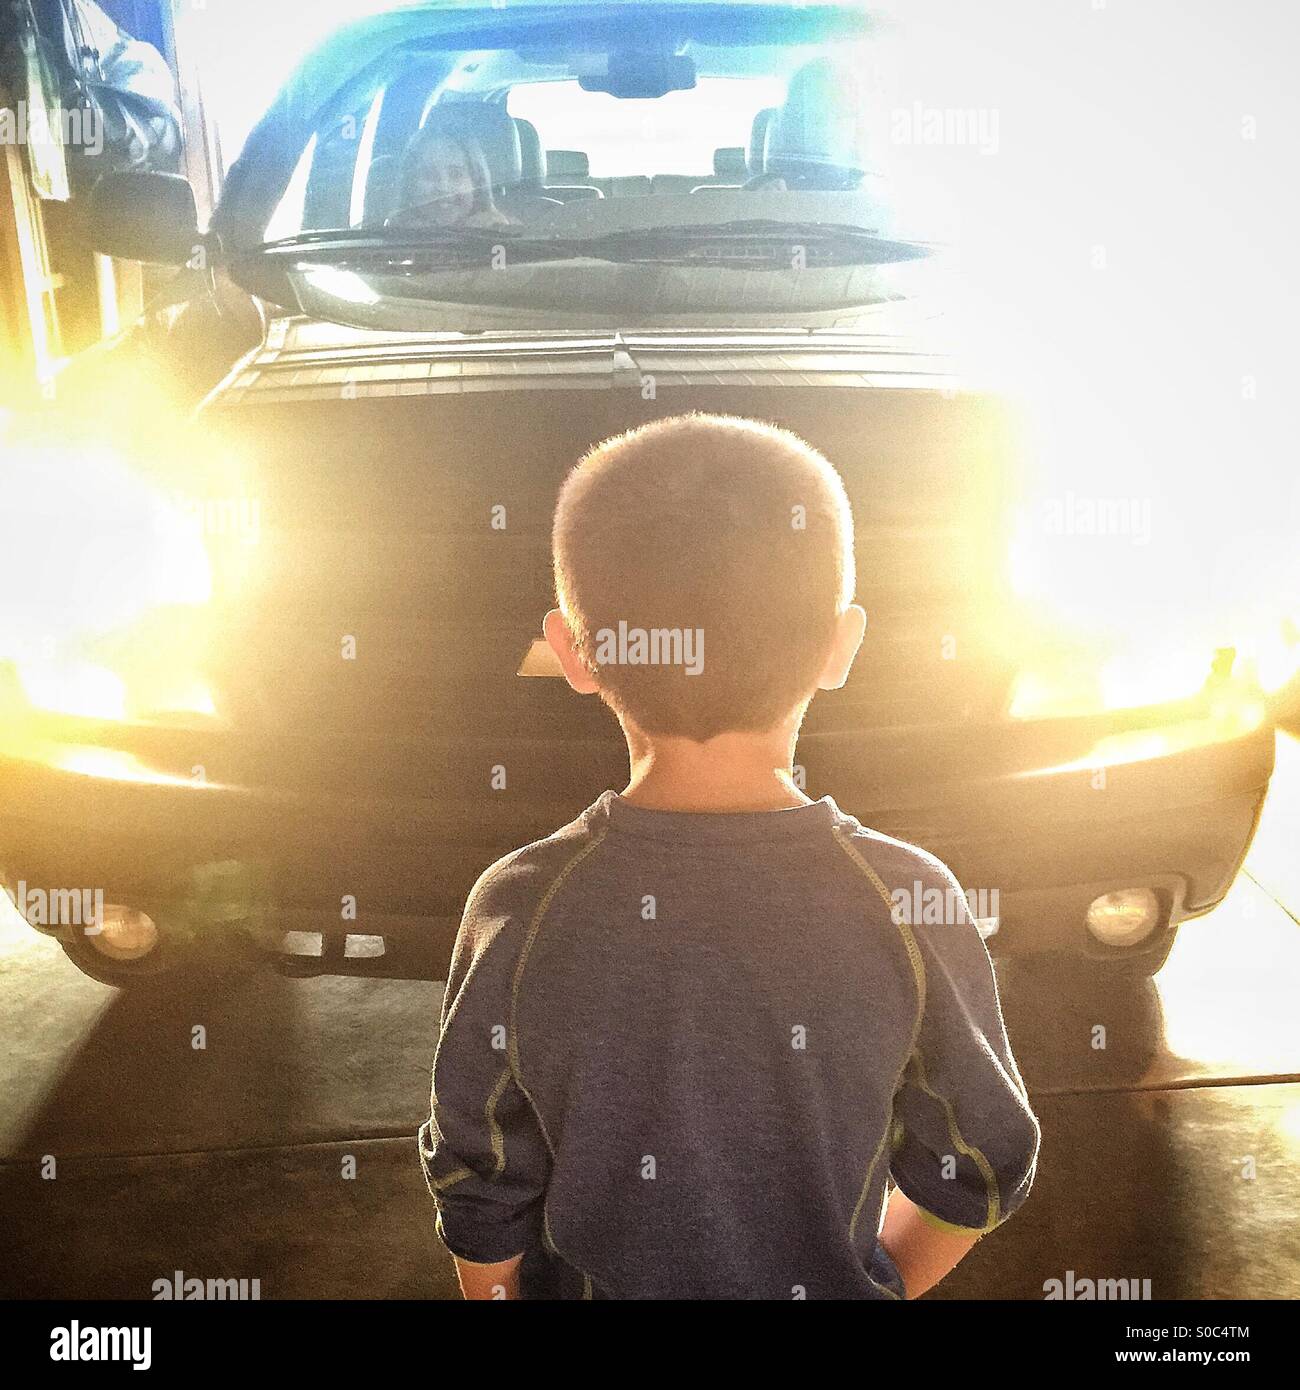 A young boy stares at the headlights of an oncoming vehicle Stock Photo